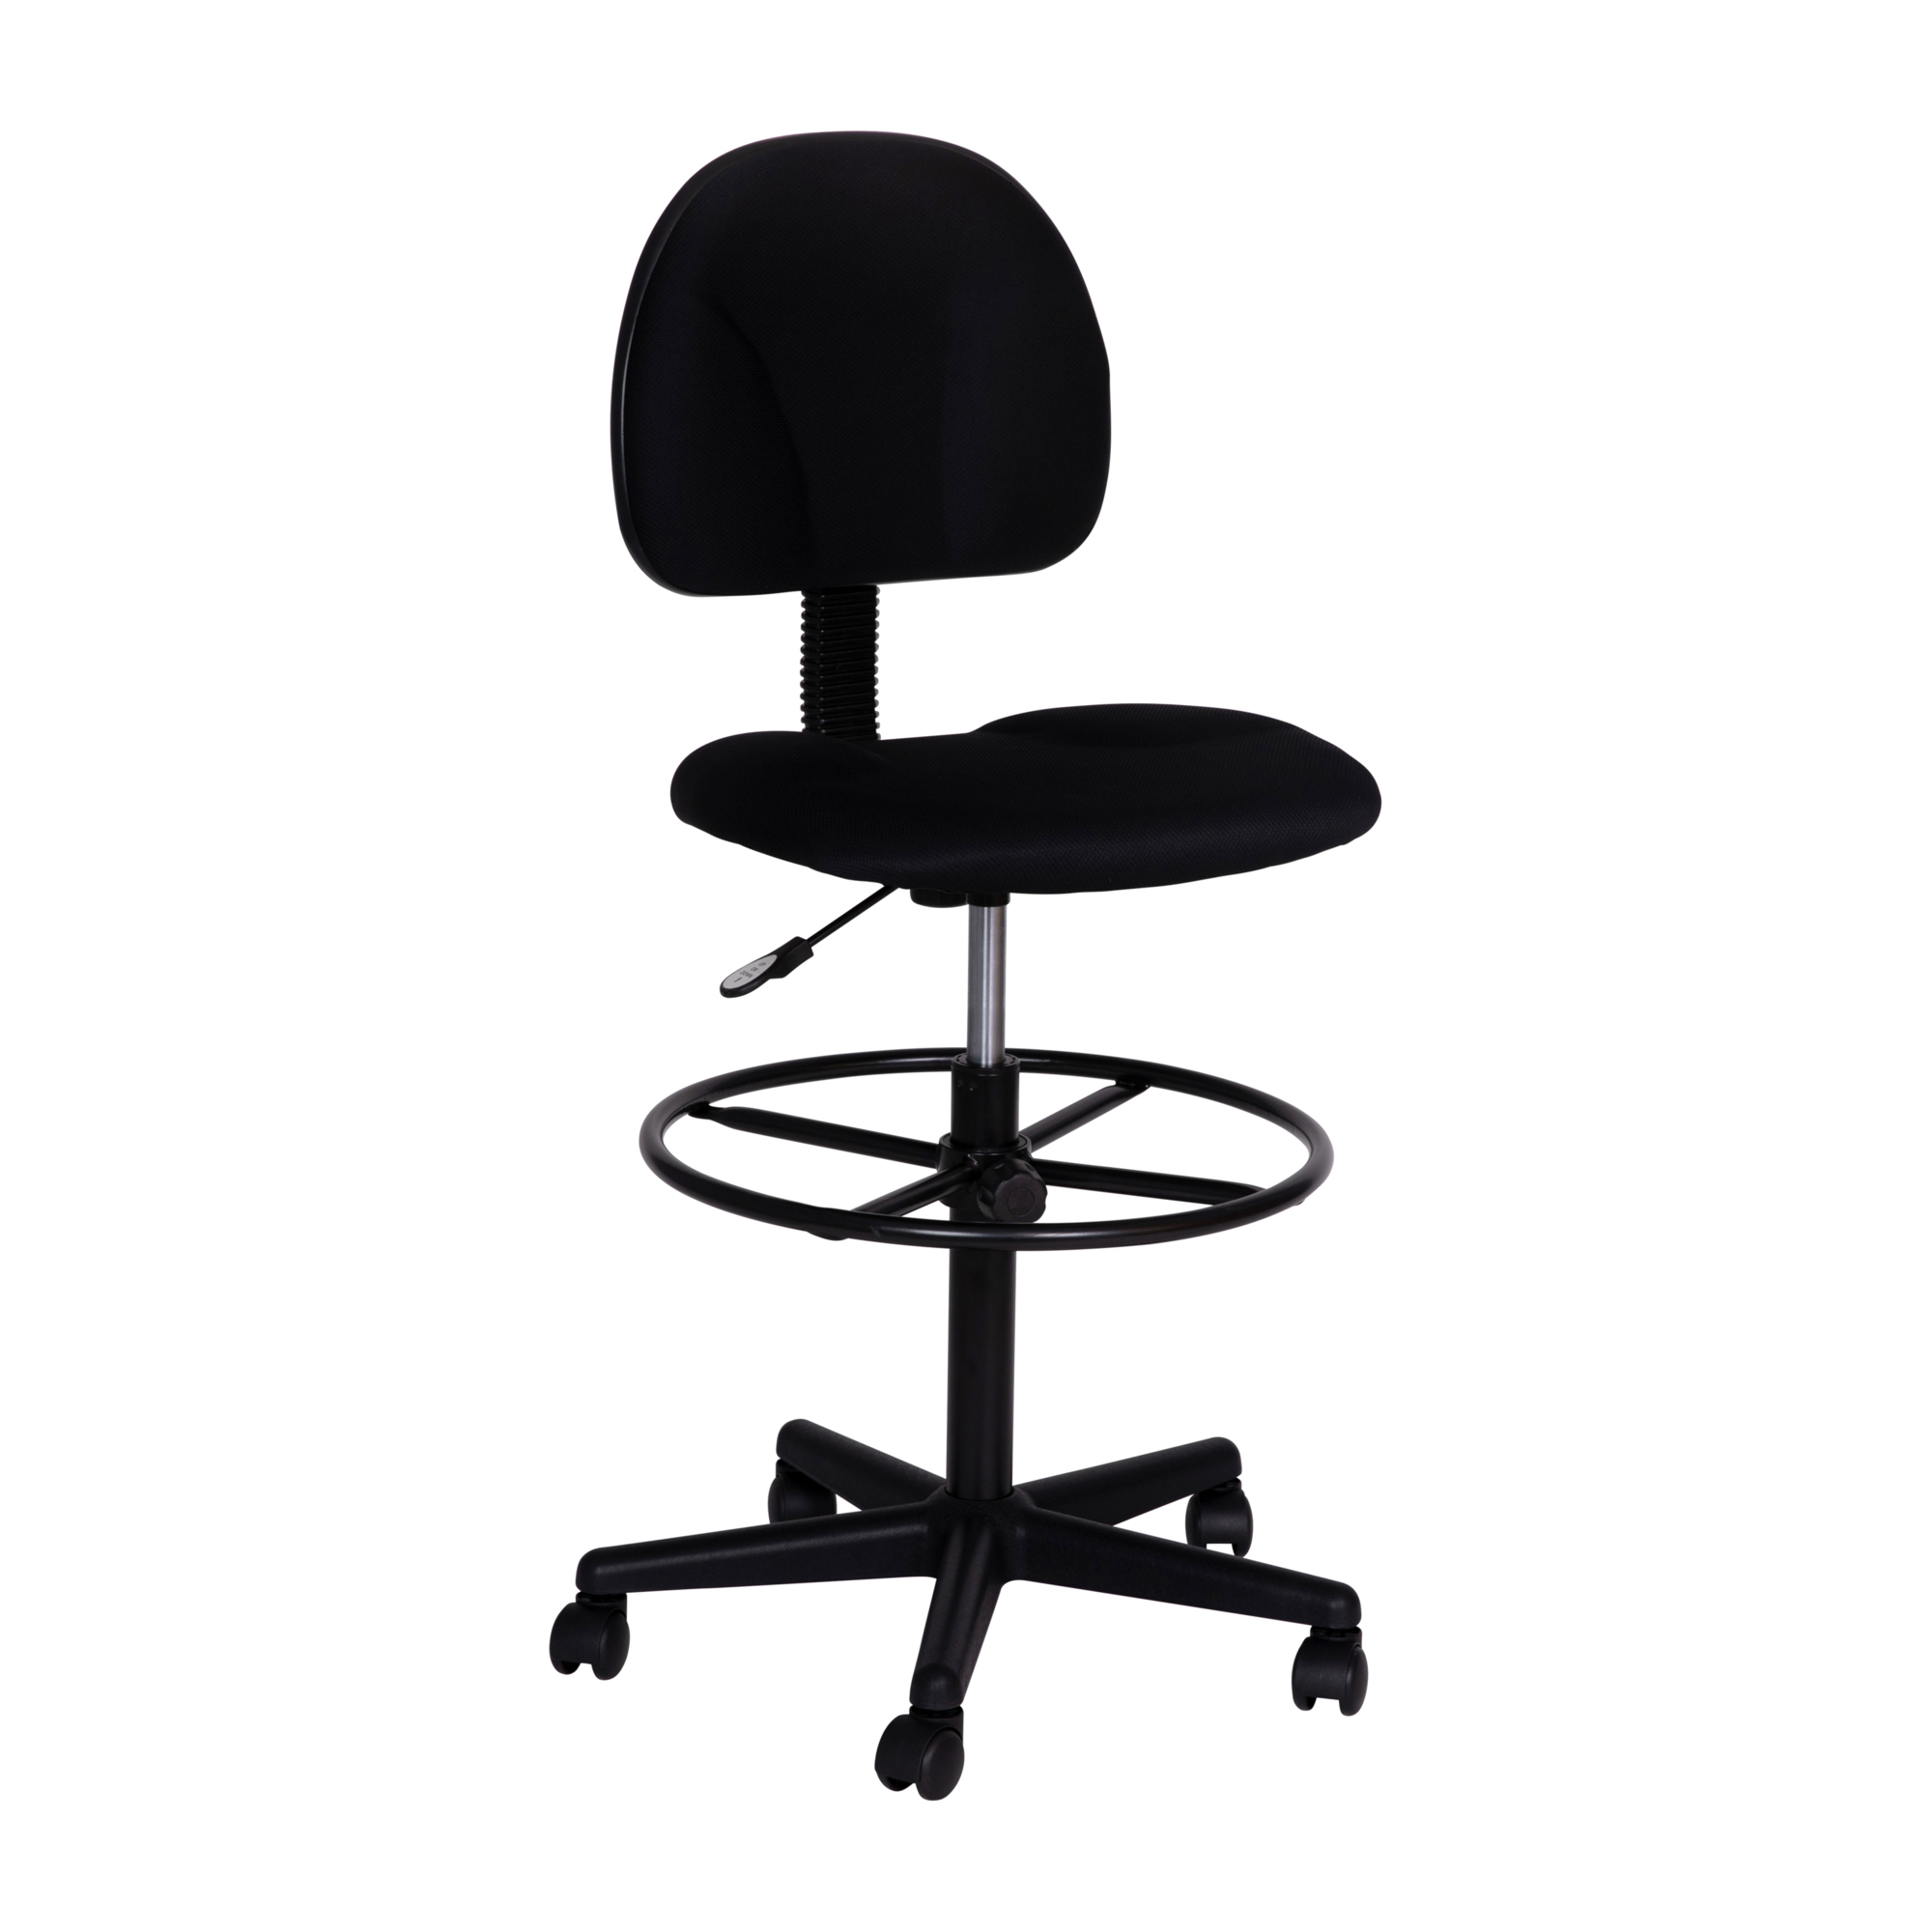 Flash Furniture, Black Fabric Swivel Drafting Chair, Primary Color Black, Included (qty.) 1, Model BT659BKSOLID